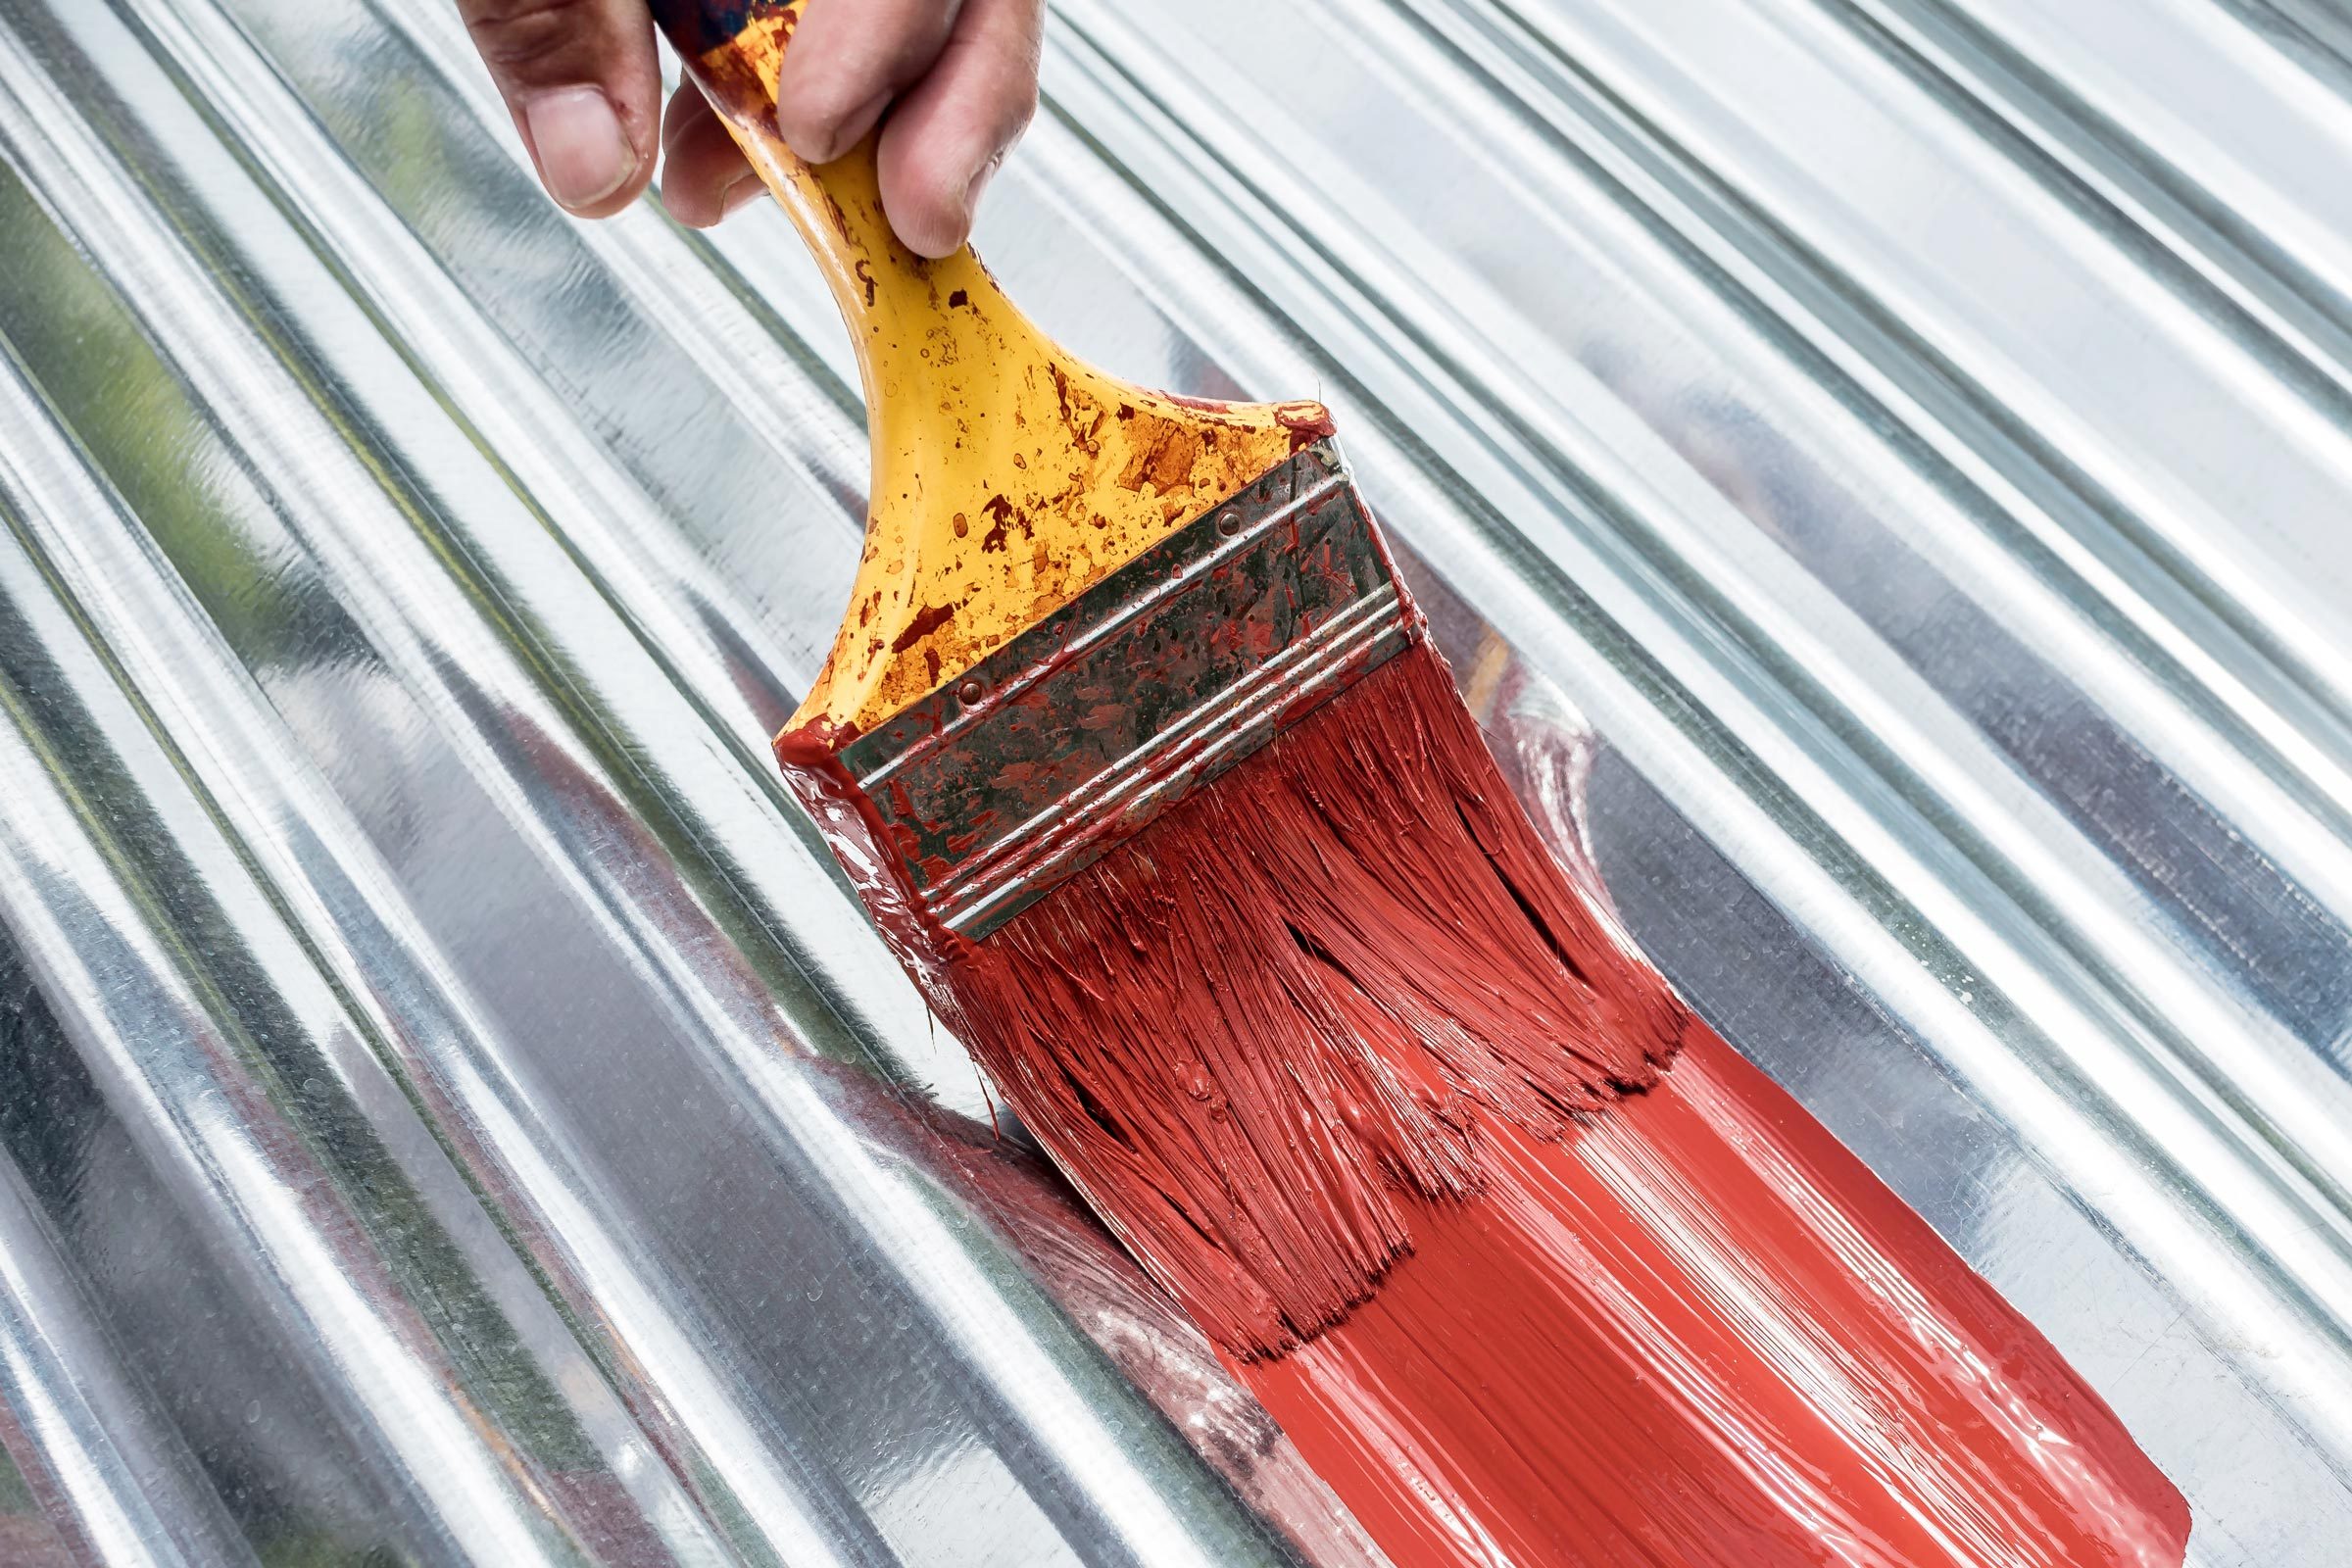 Is it better to spray paint or brush paint metal?